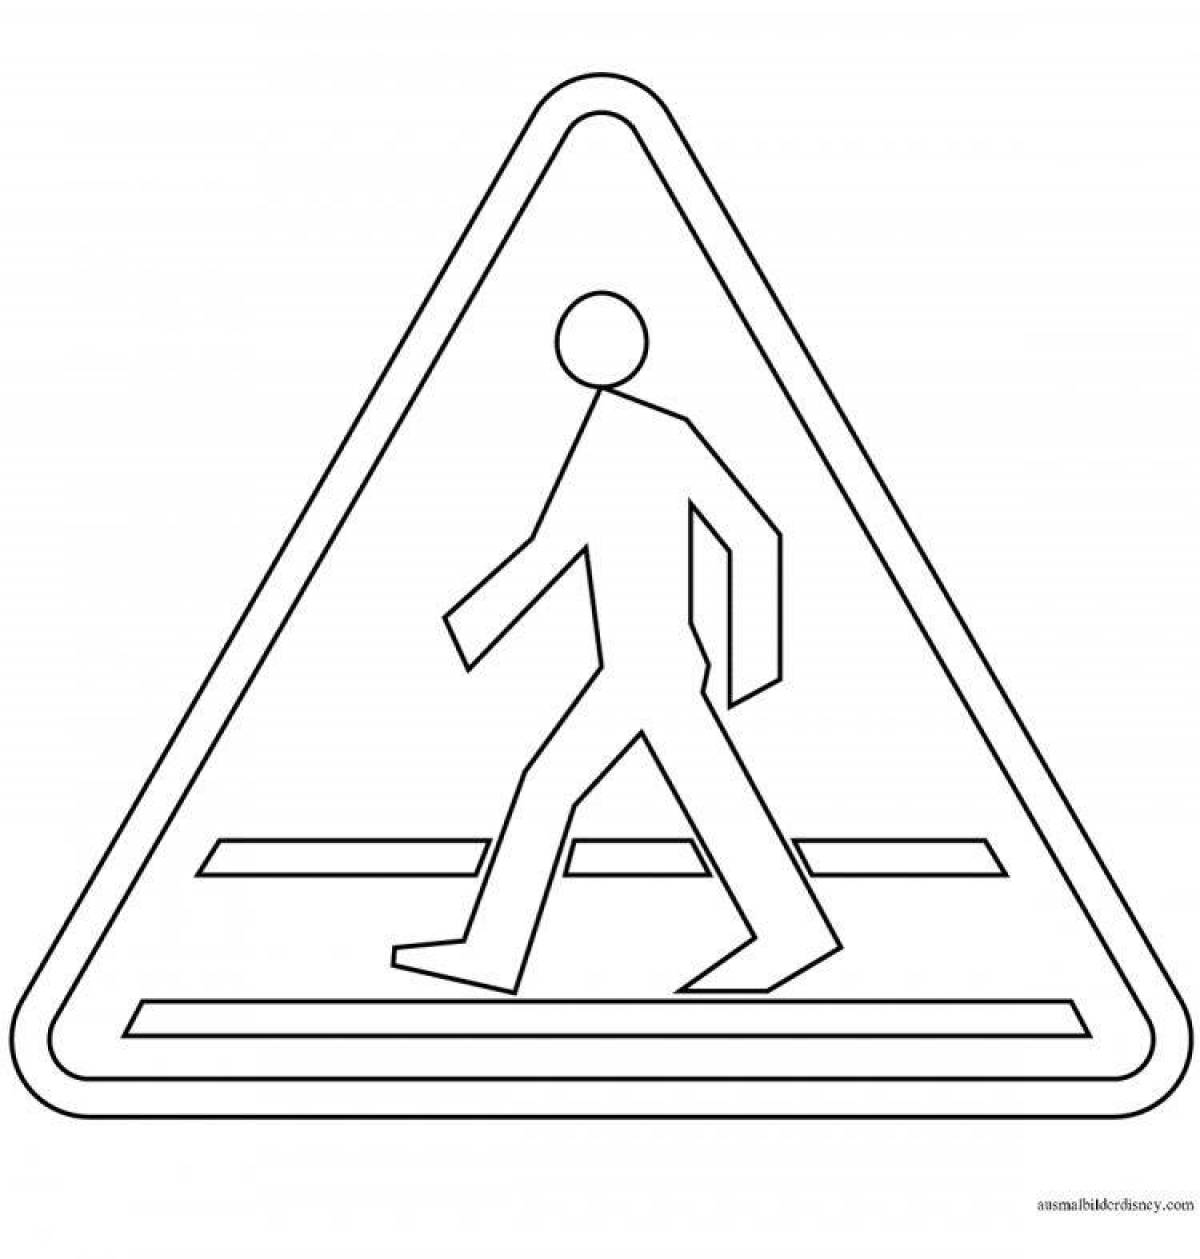 Coloring page pedestrian crossing road sign